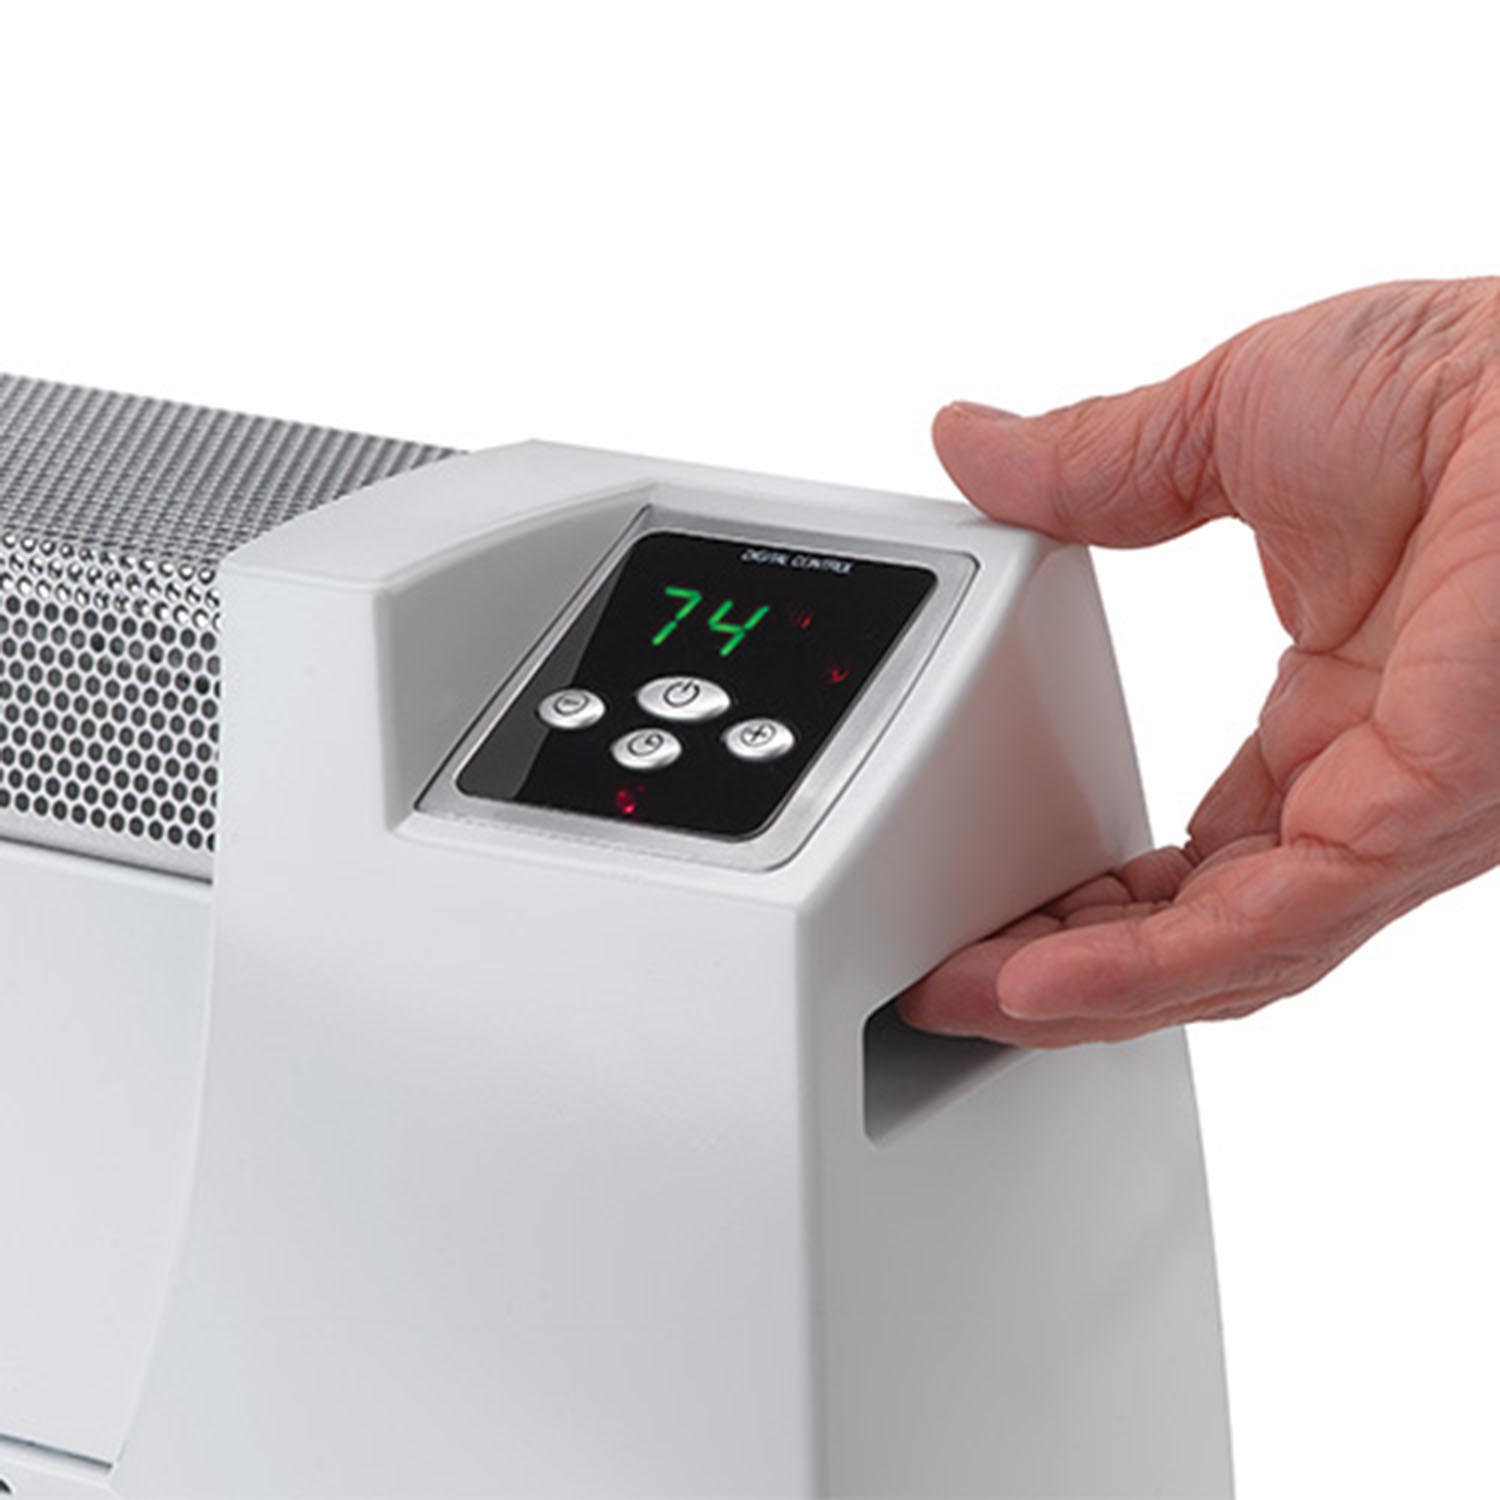 Lasko Silent Heater with Digital Display, White - image 4 of 5